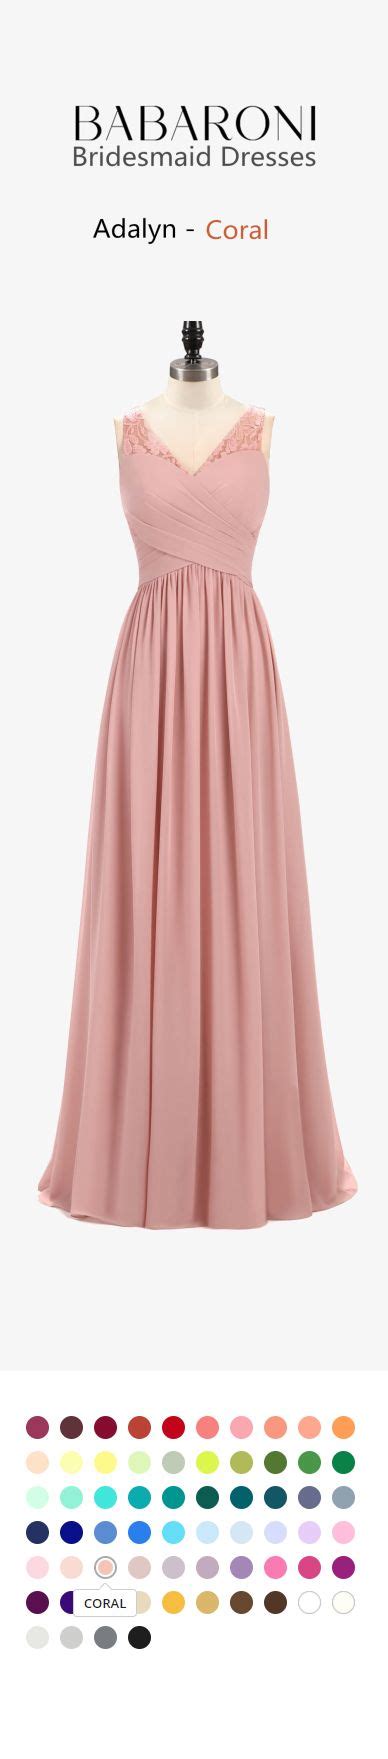 Adalyn Is A Romantic Floor Length Chiffon Dress In An A Line Cut It Features A V Neckline With